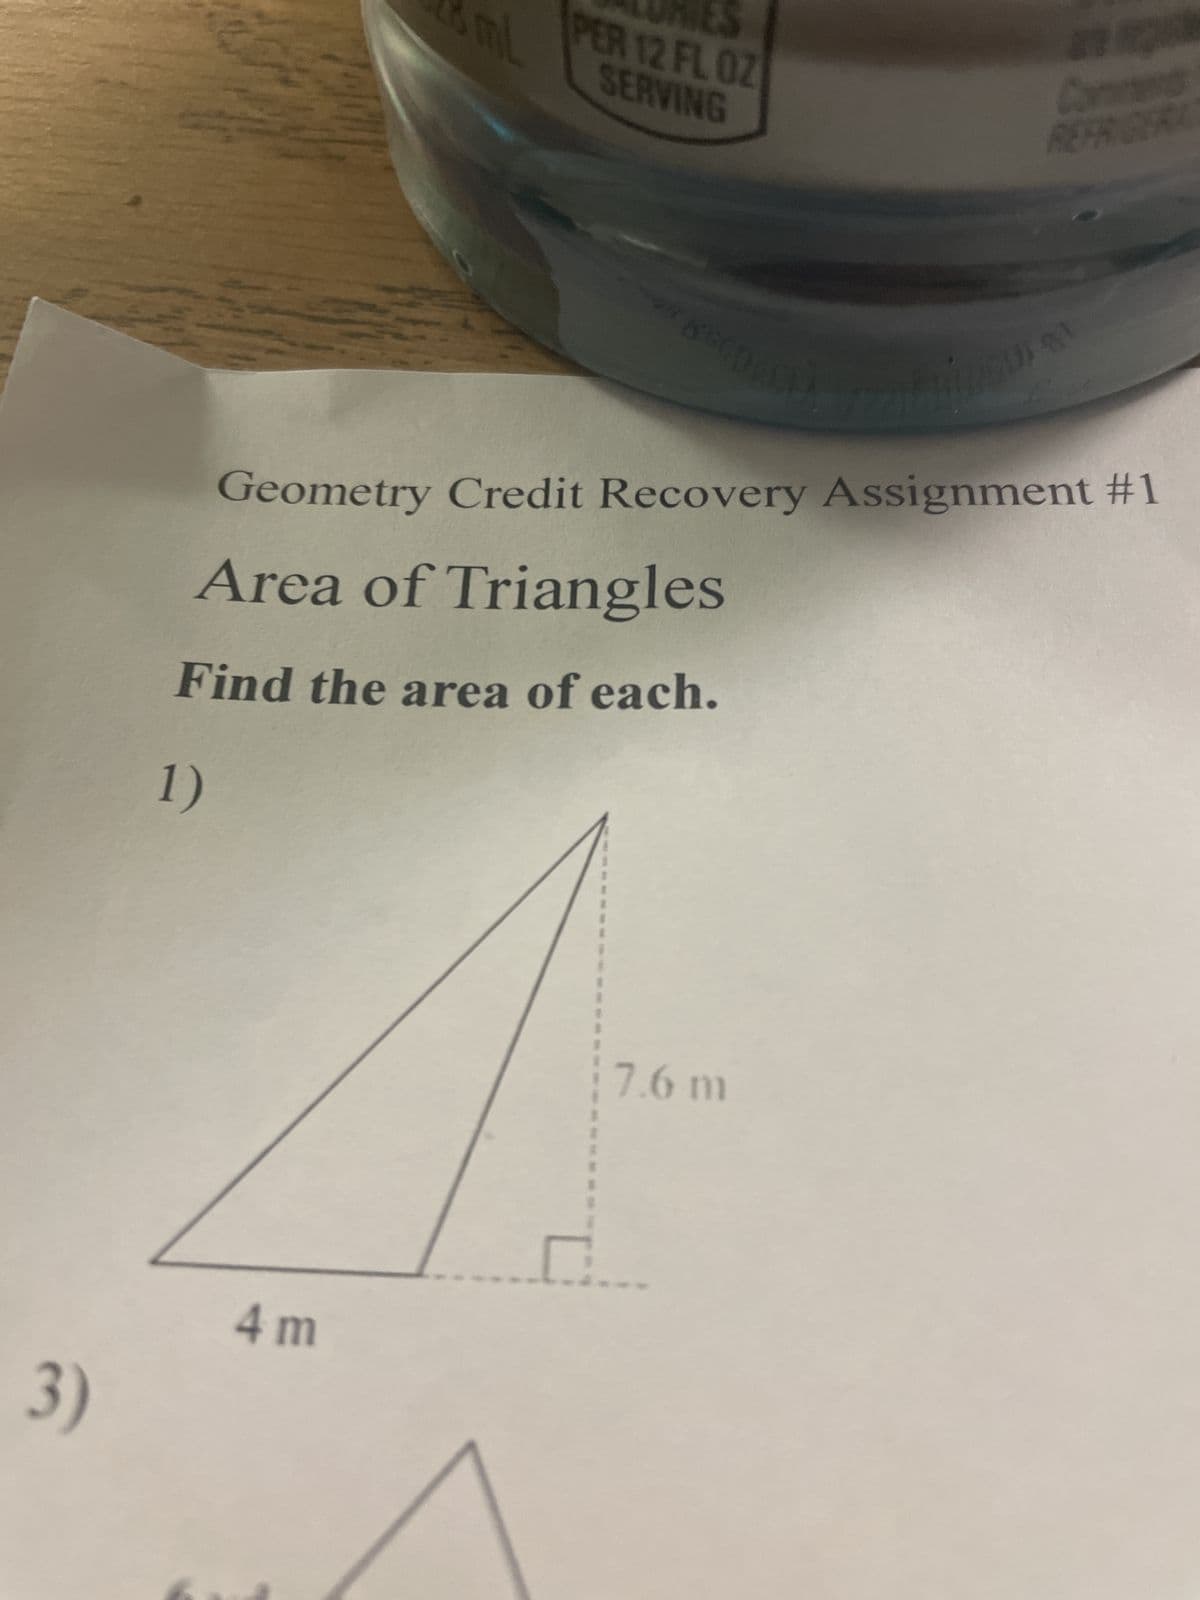 URIES
ml
PER 12 FL OZ
SERVING
Comments
REFRIGERA
Geometry Credit Recovery Assignment #1
Area of Triangles
Find the area of each.
1)
3)
4 M
7.6 m